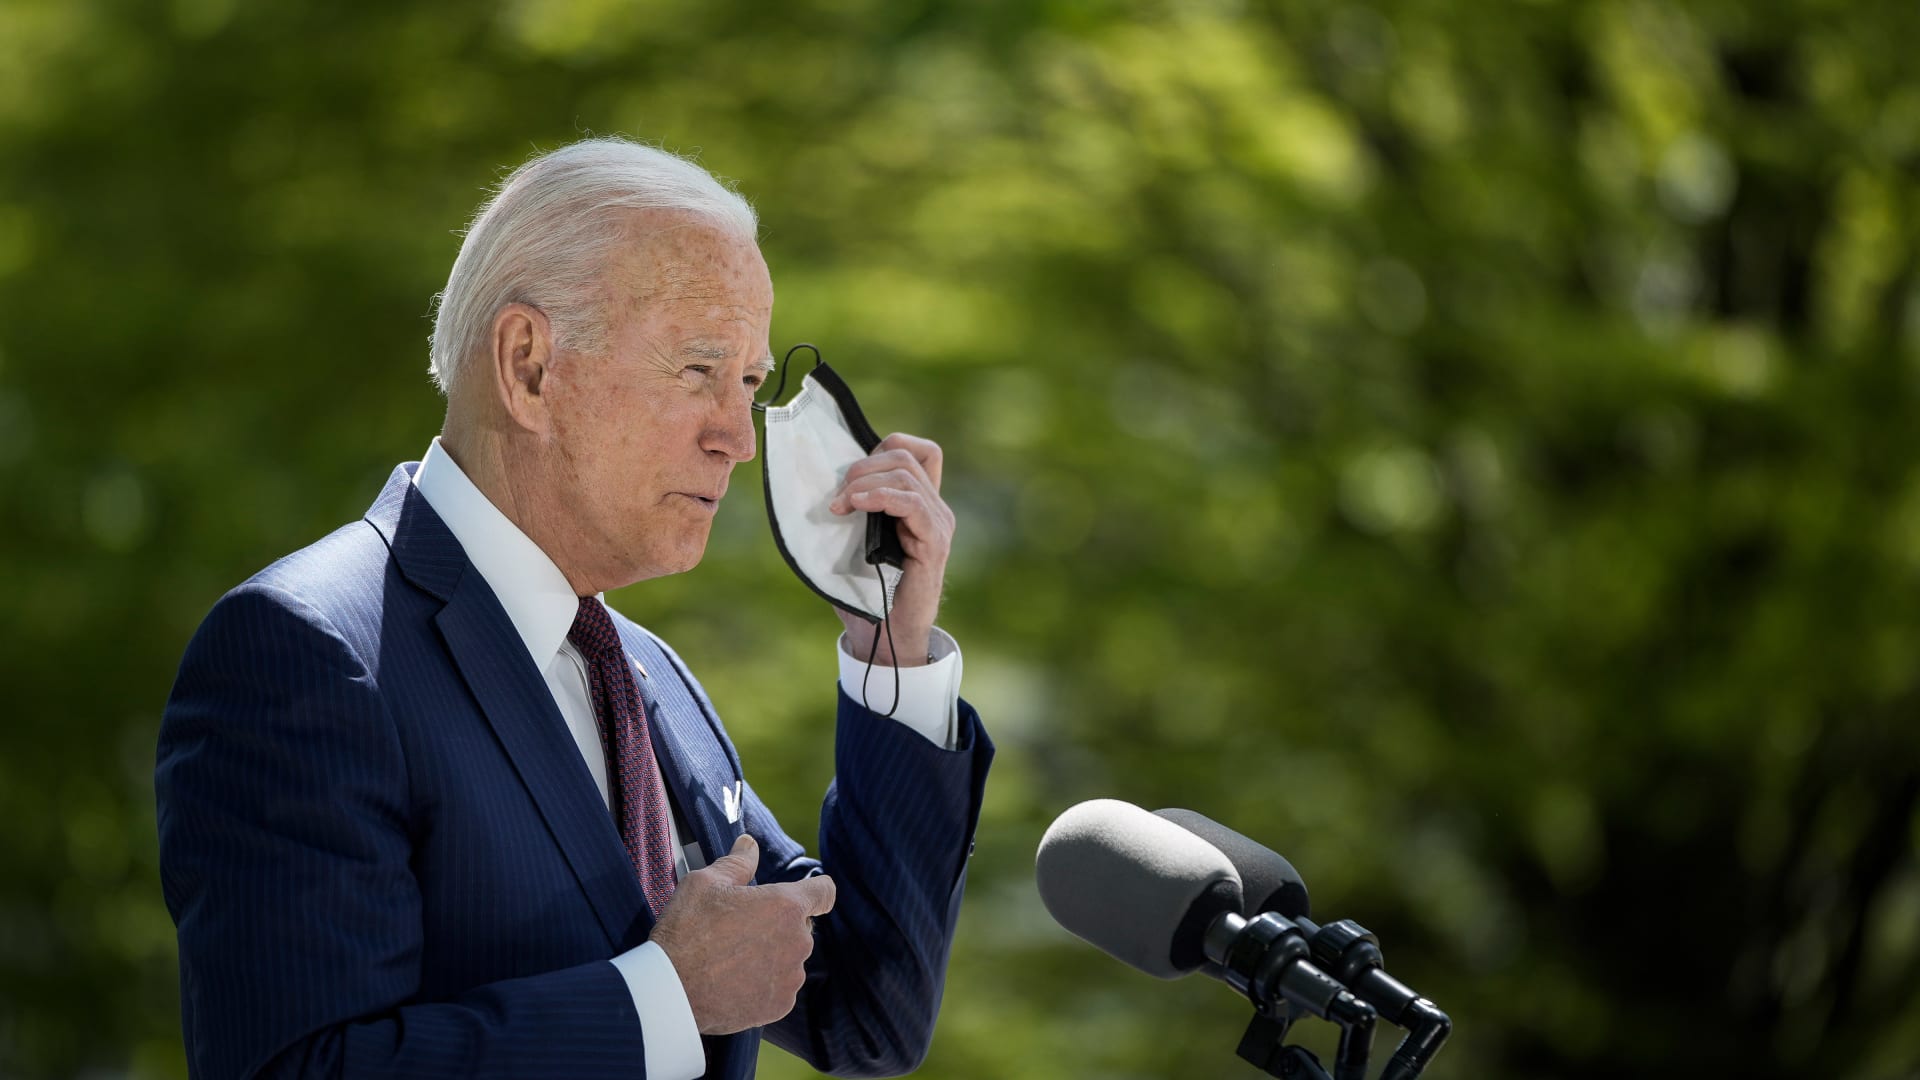 President Joe Biden removes his mask before speaking about updated CDC mask guidance on the North Lawn of the White House on April 27, 2021, in Washington, D.C. President Biden announced updated CDC guidance, saying vaccinated Americans do not need to wear a mask outside when in small groups.